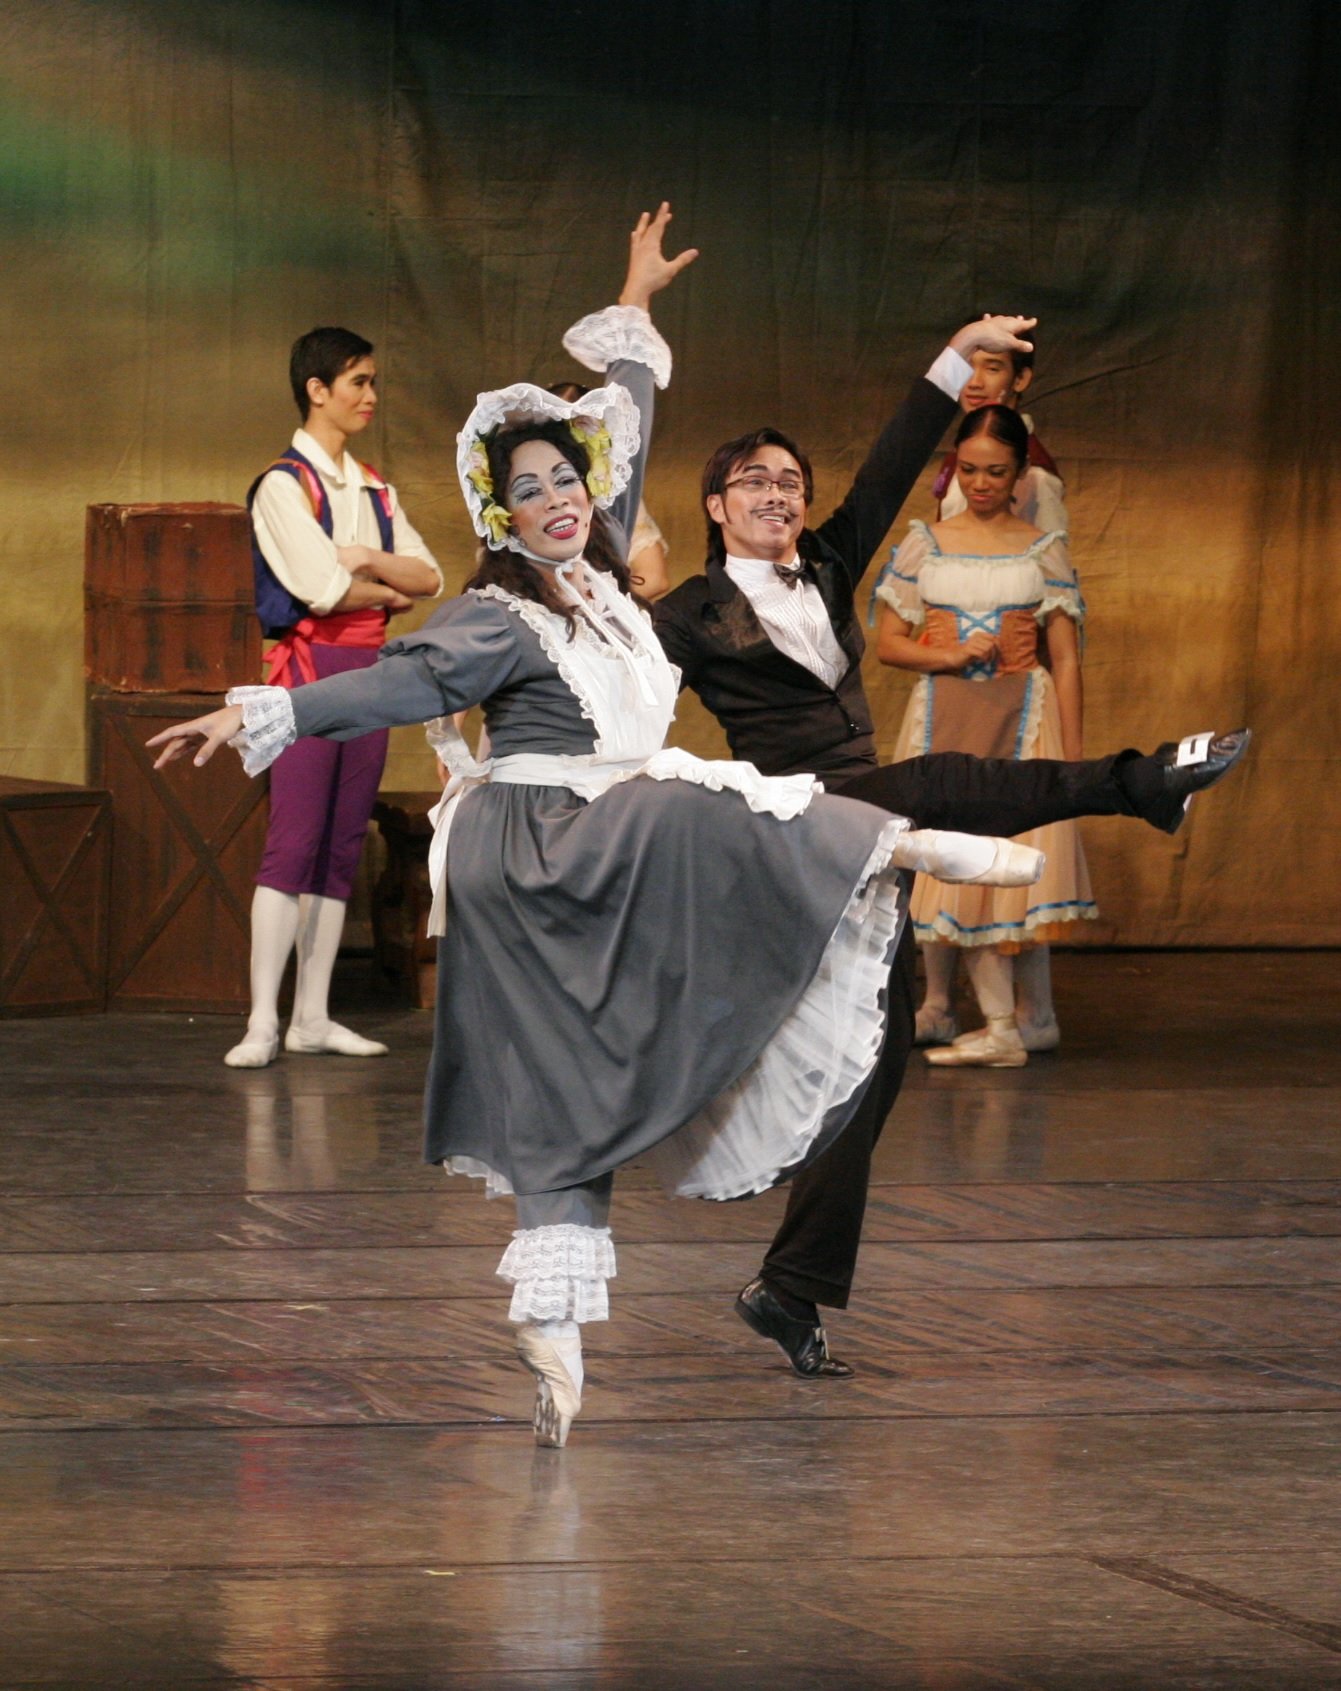    The flirtatious Widow Simone (Jonathan Janolo) and the seemingly enamored Thomas (Marcus Tolentino) go toe to toe in  La Fille Mal Gardee  (2008). The scene is made hilarious as Simone – usually played by a danseur – gives her all to attract the w